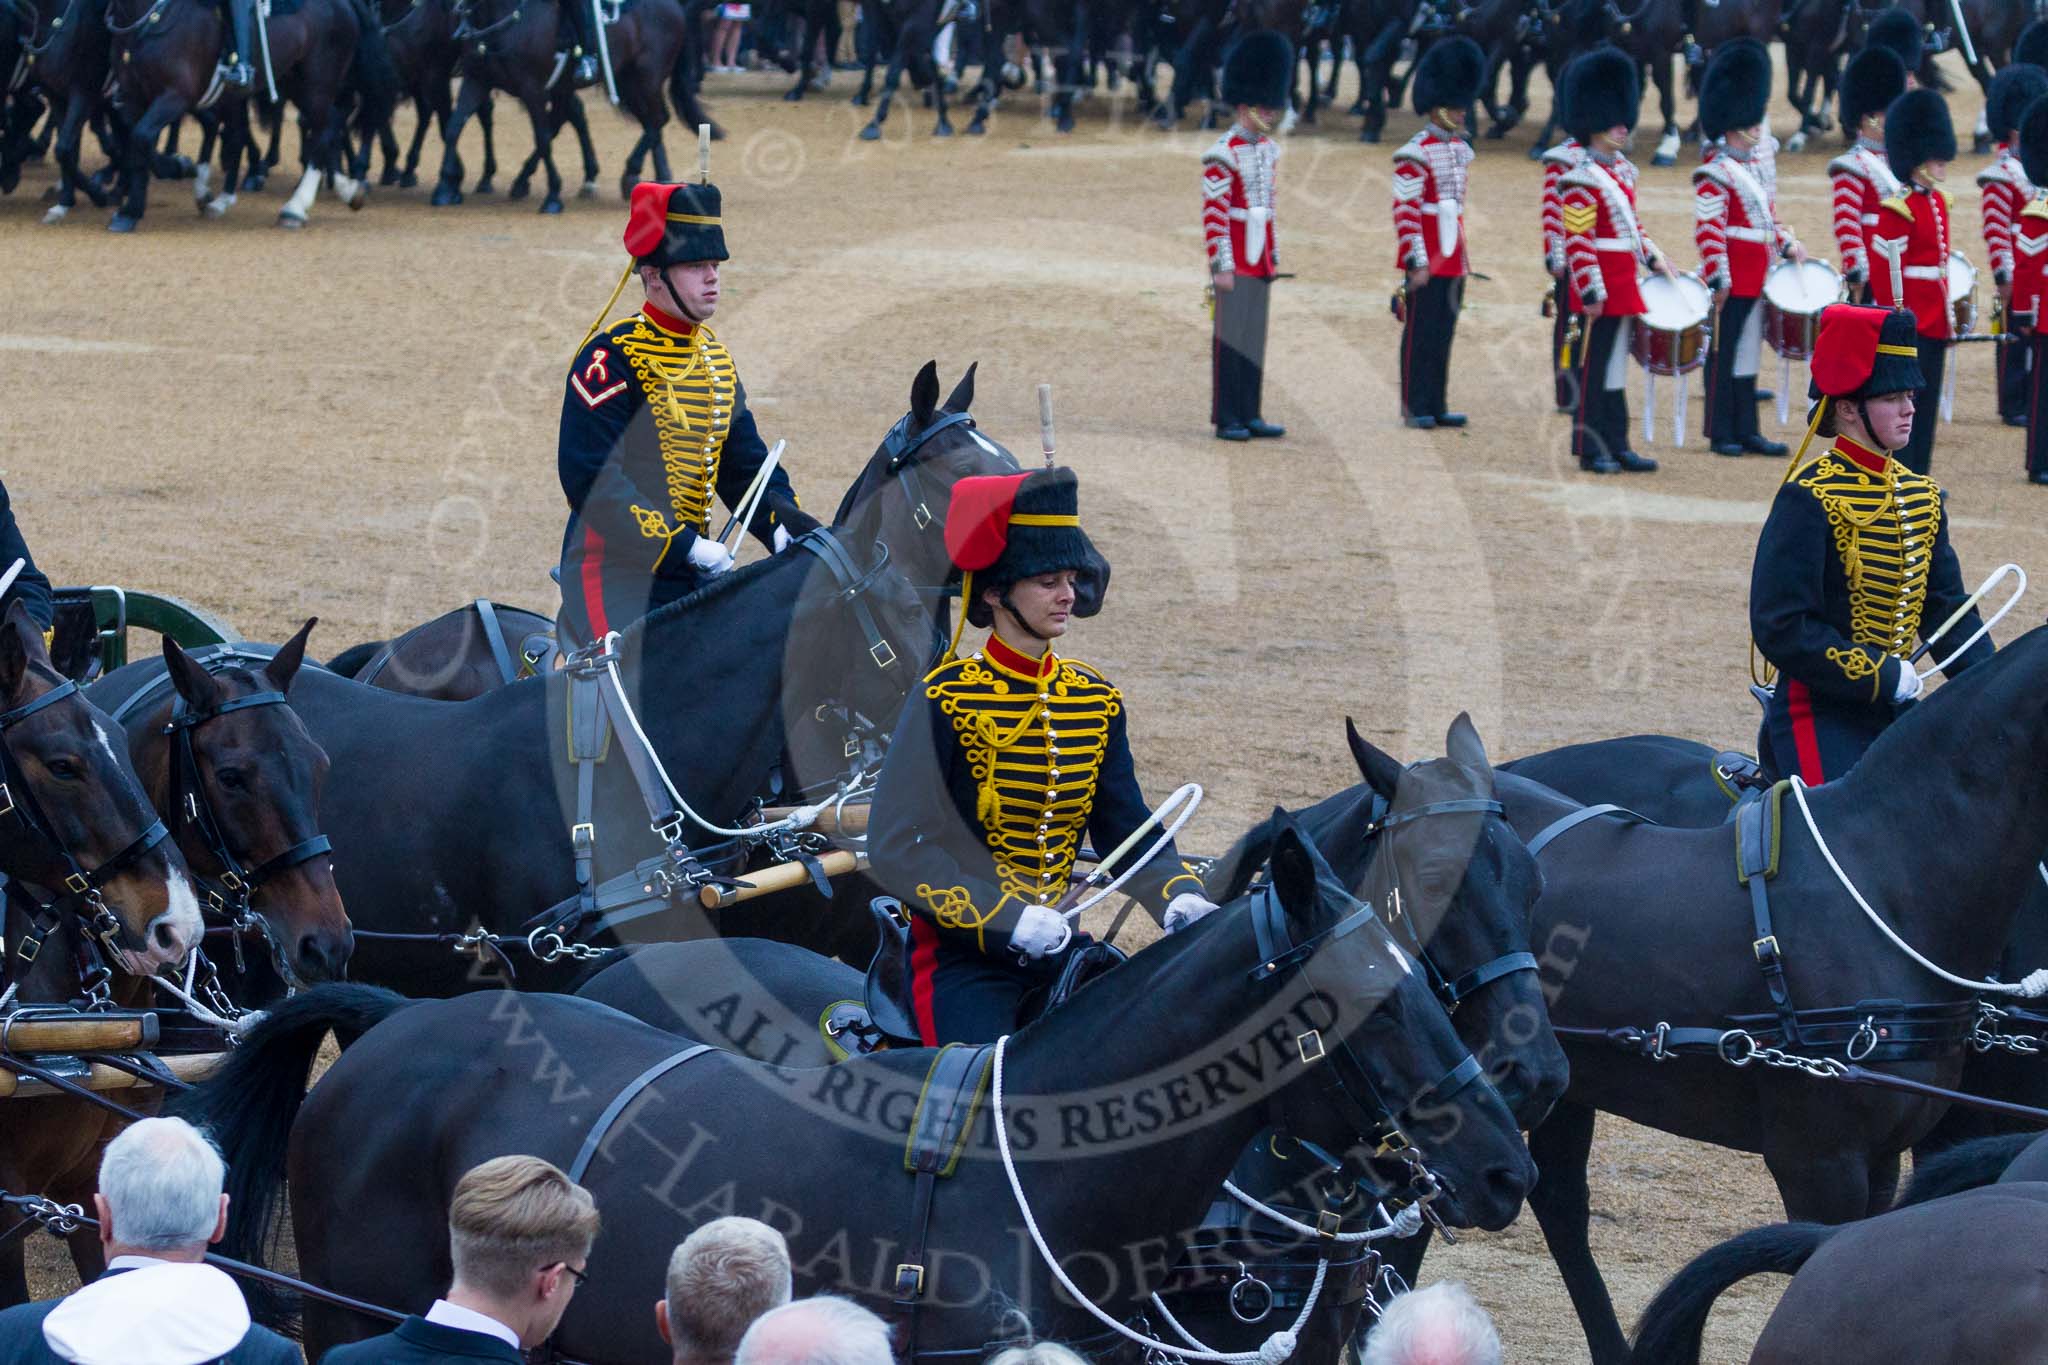 Trooping the Colour 2015. Image #586, 13 June 2015 11:57 Horse Guards Parade, London, UK